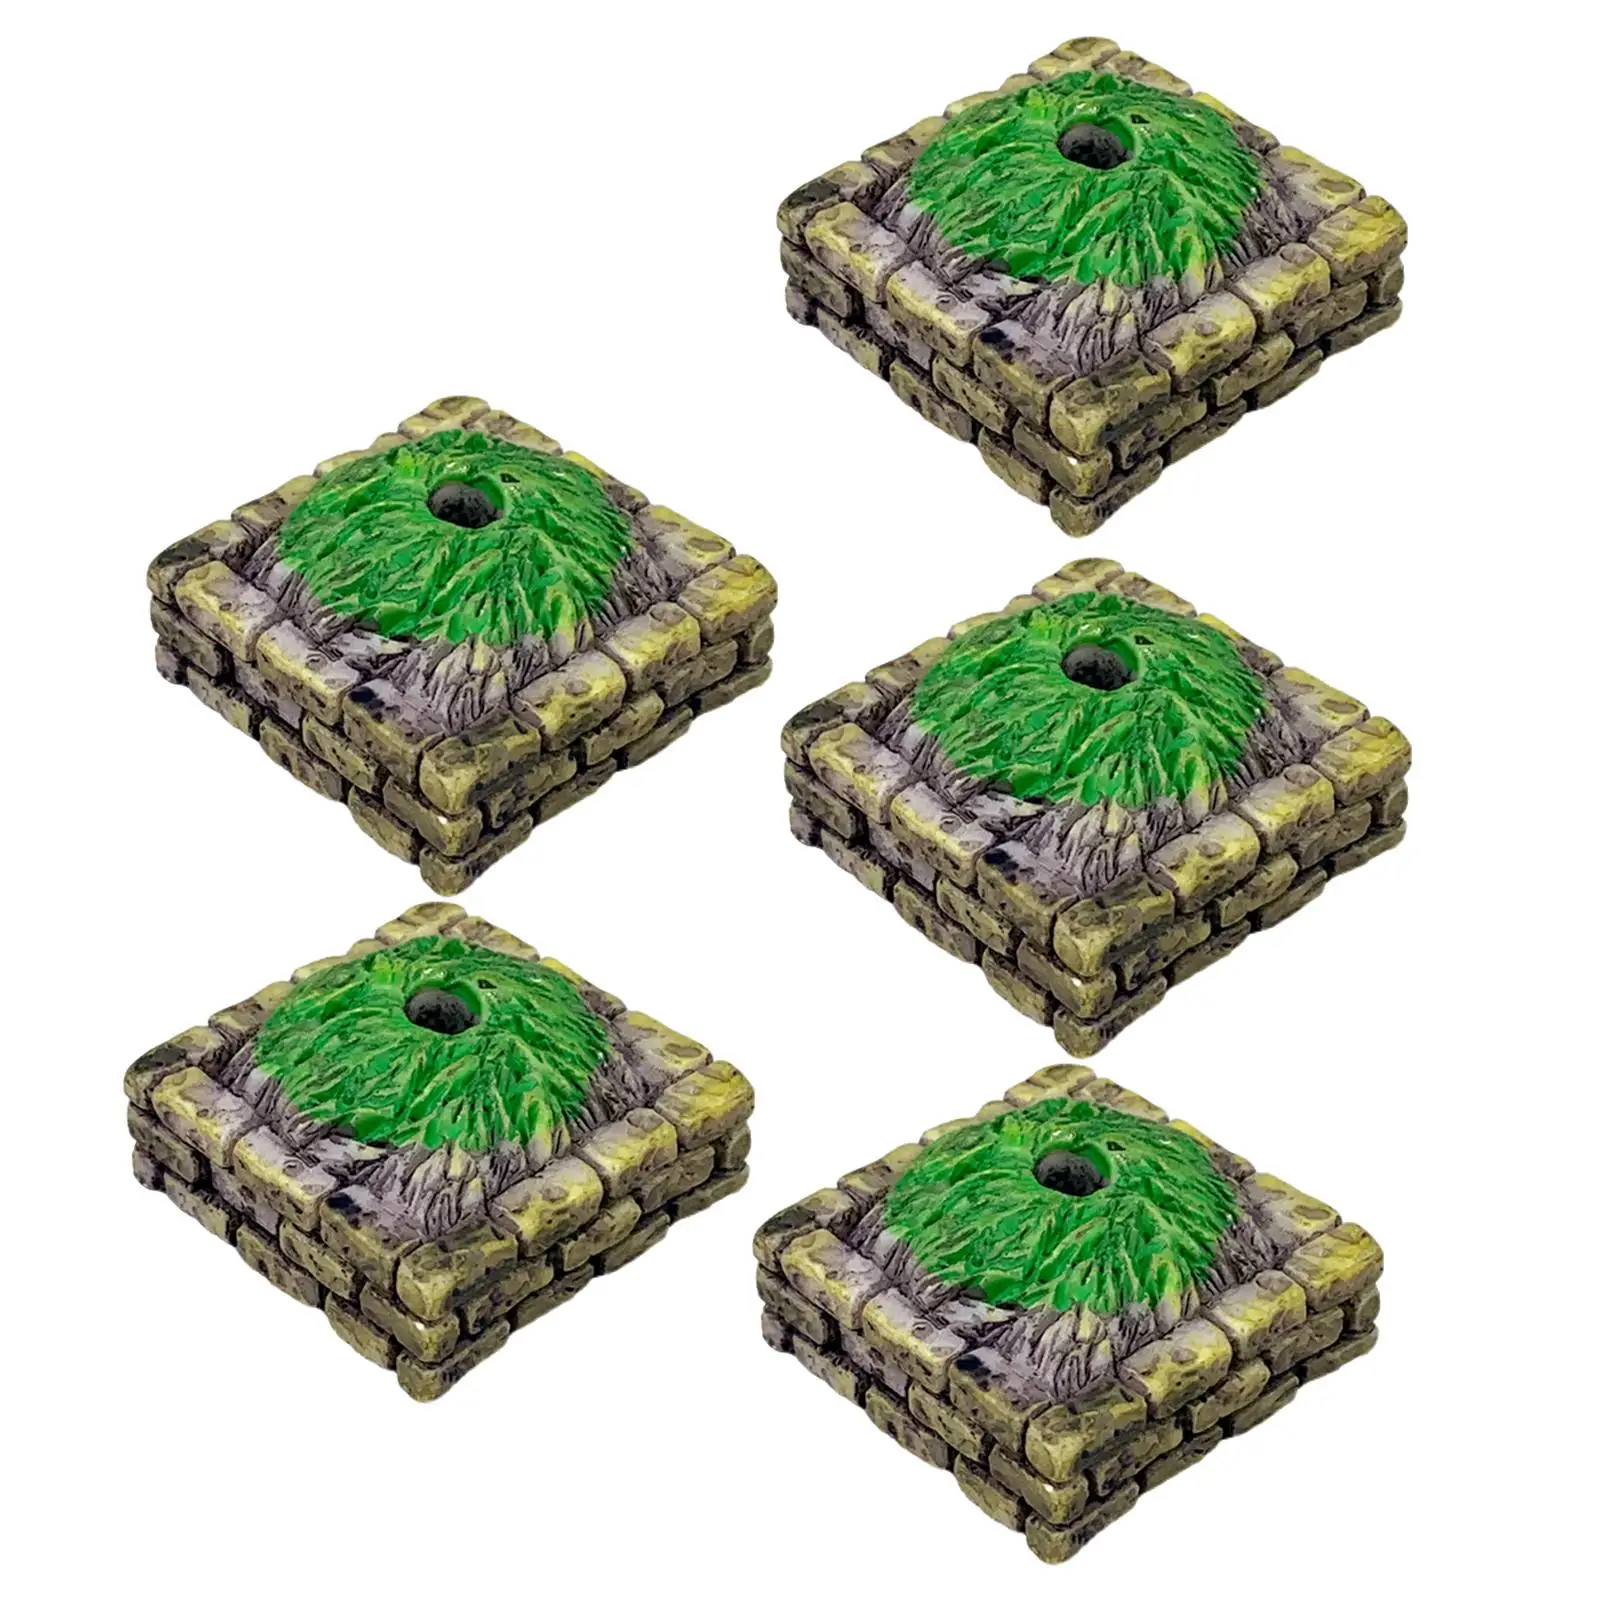 5x Miniature Flower Beds Model Decorative Resin Craft for Architecture Model